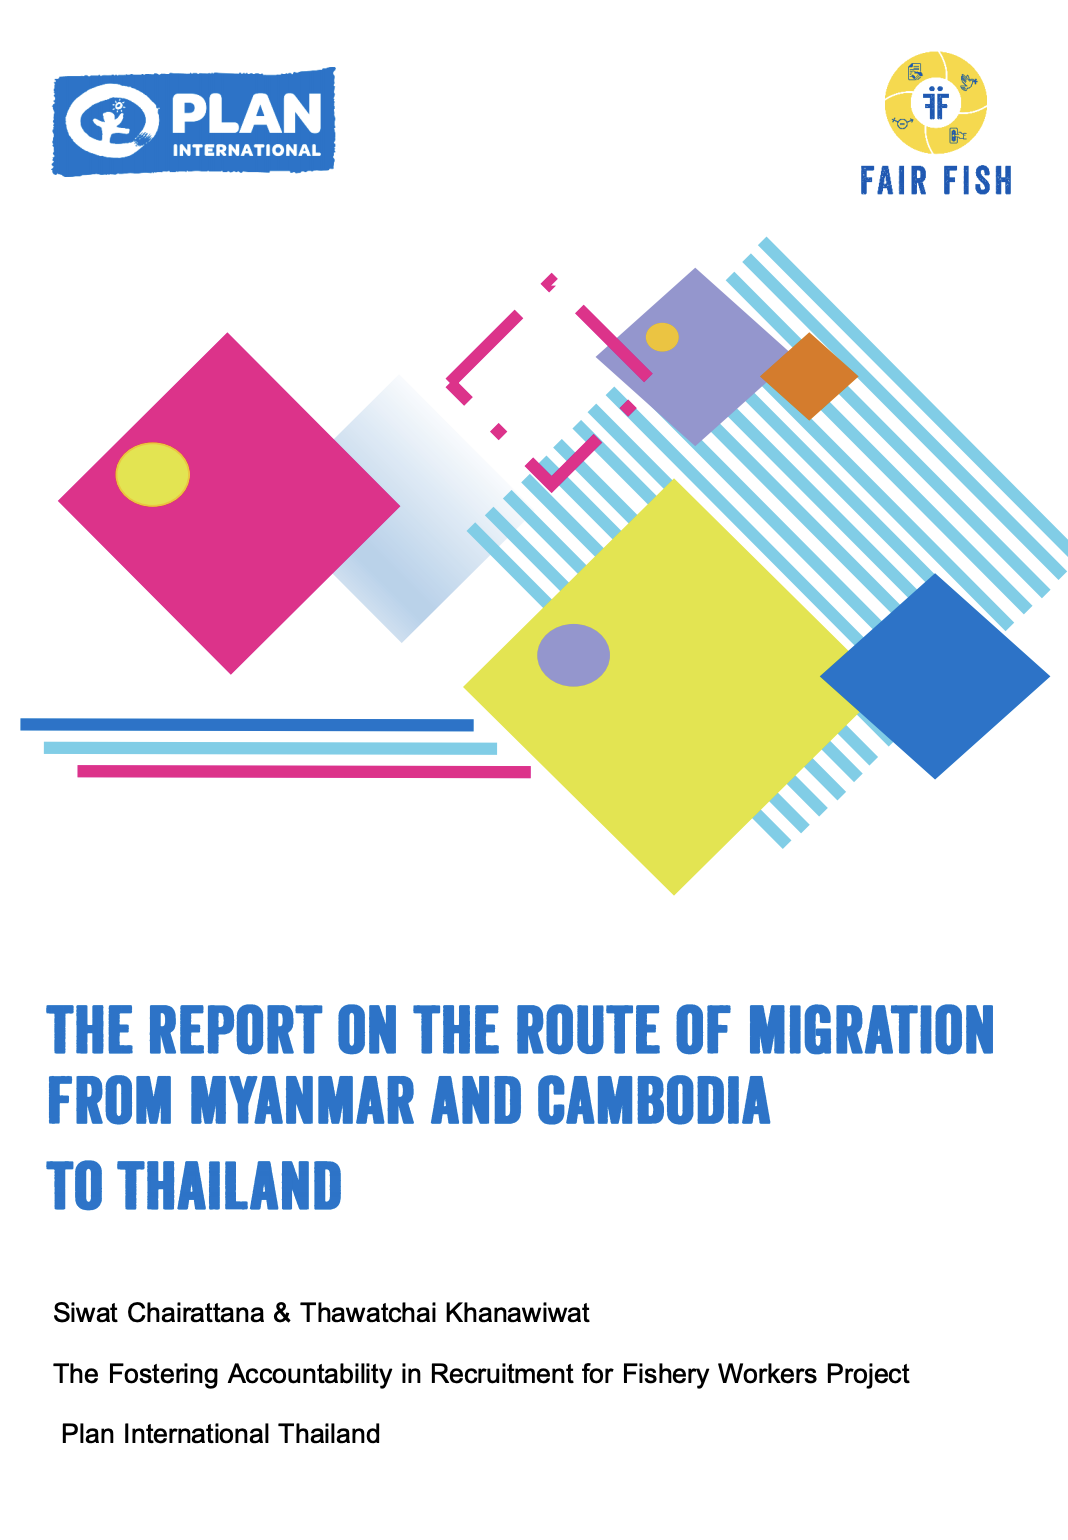 The Report on the Route of Migration from Myanmar and Cambodia to Thailand